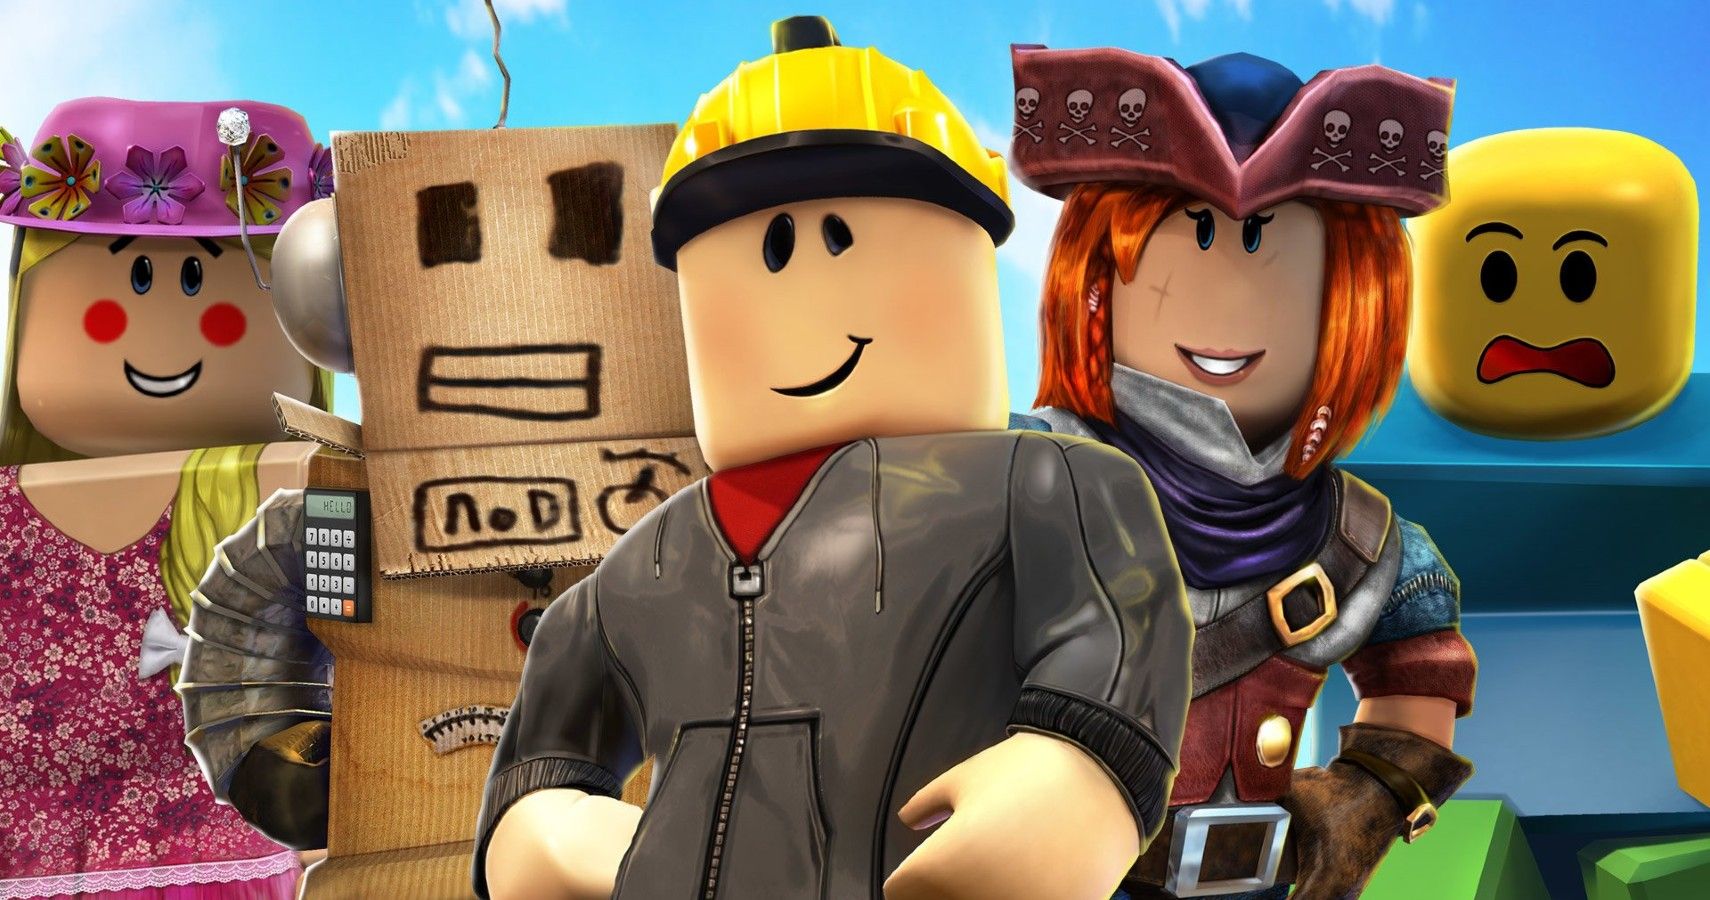 Hacker Bribes Roblox Worker For User Account Access To Prove A